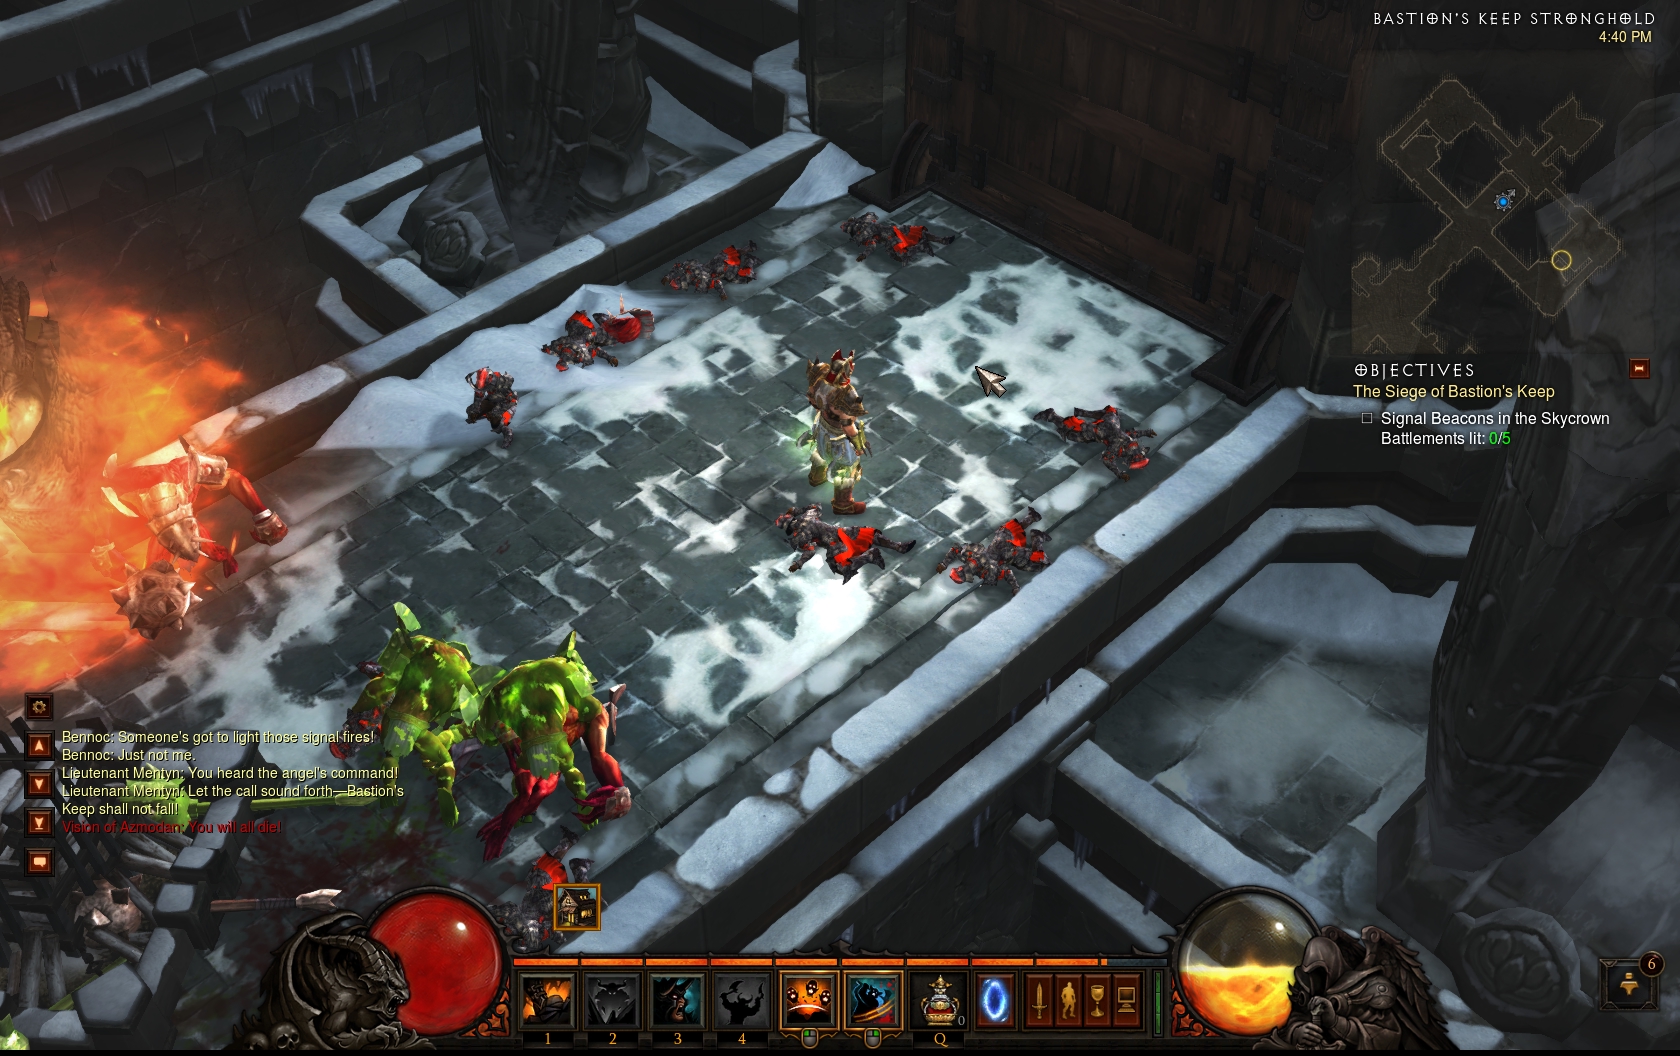 Diablo III Review: Imperfectly Executed